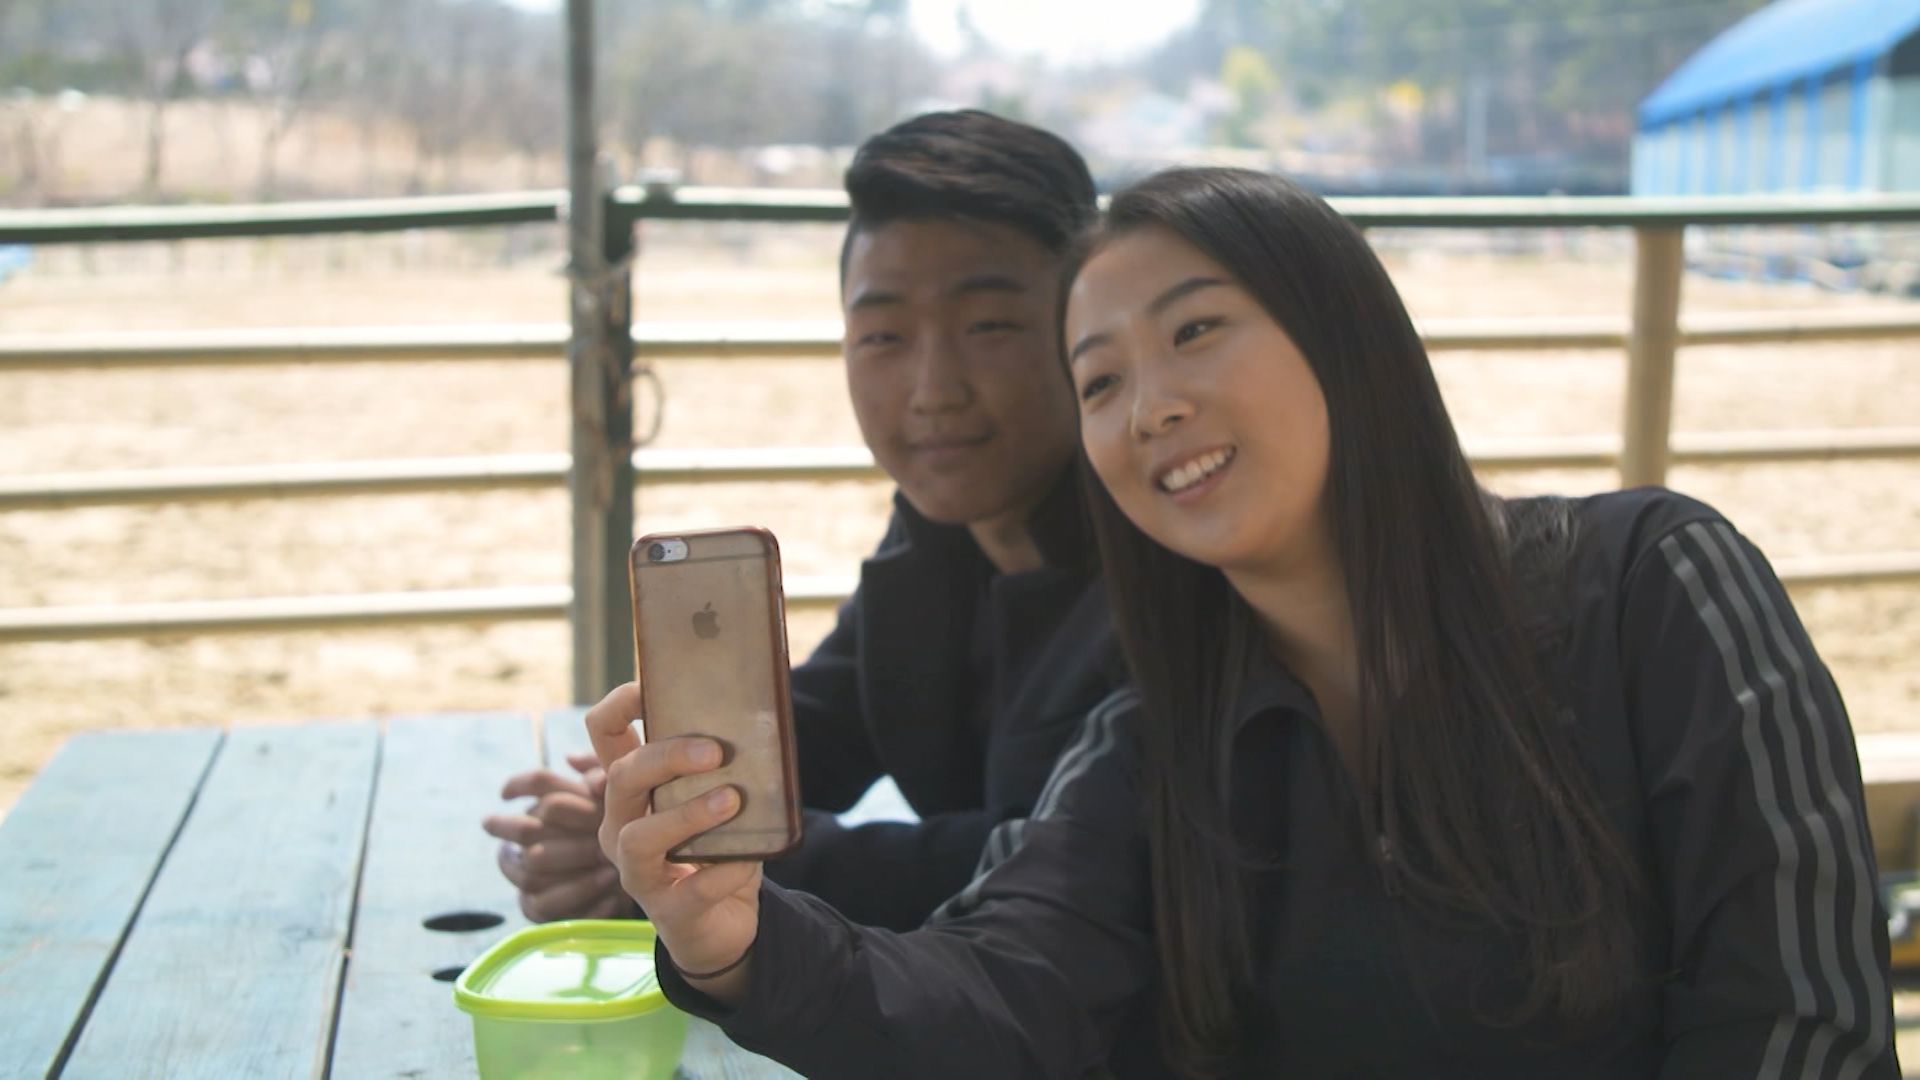 Corian School Girl Rep Xxx - Why young South Koreans aren't interested in dating | CNN